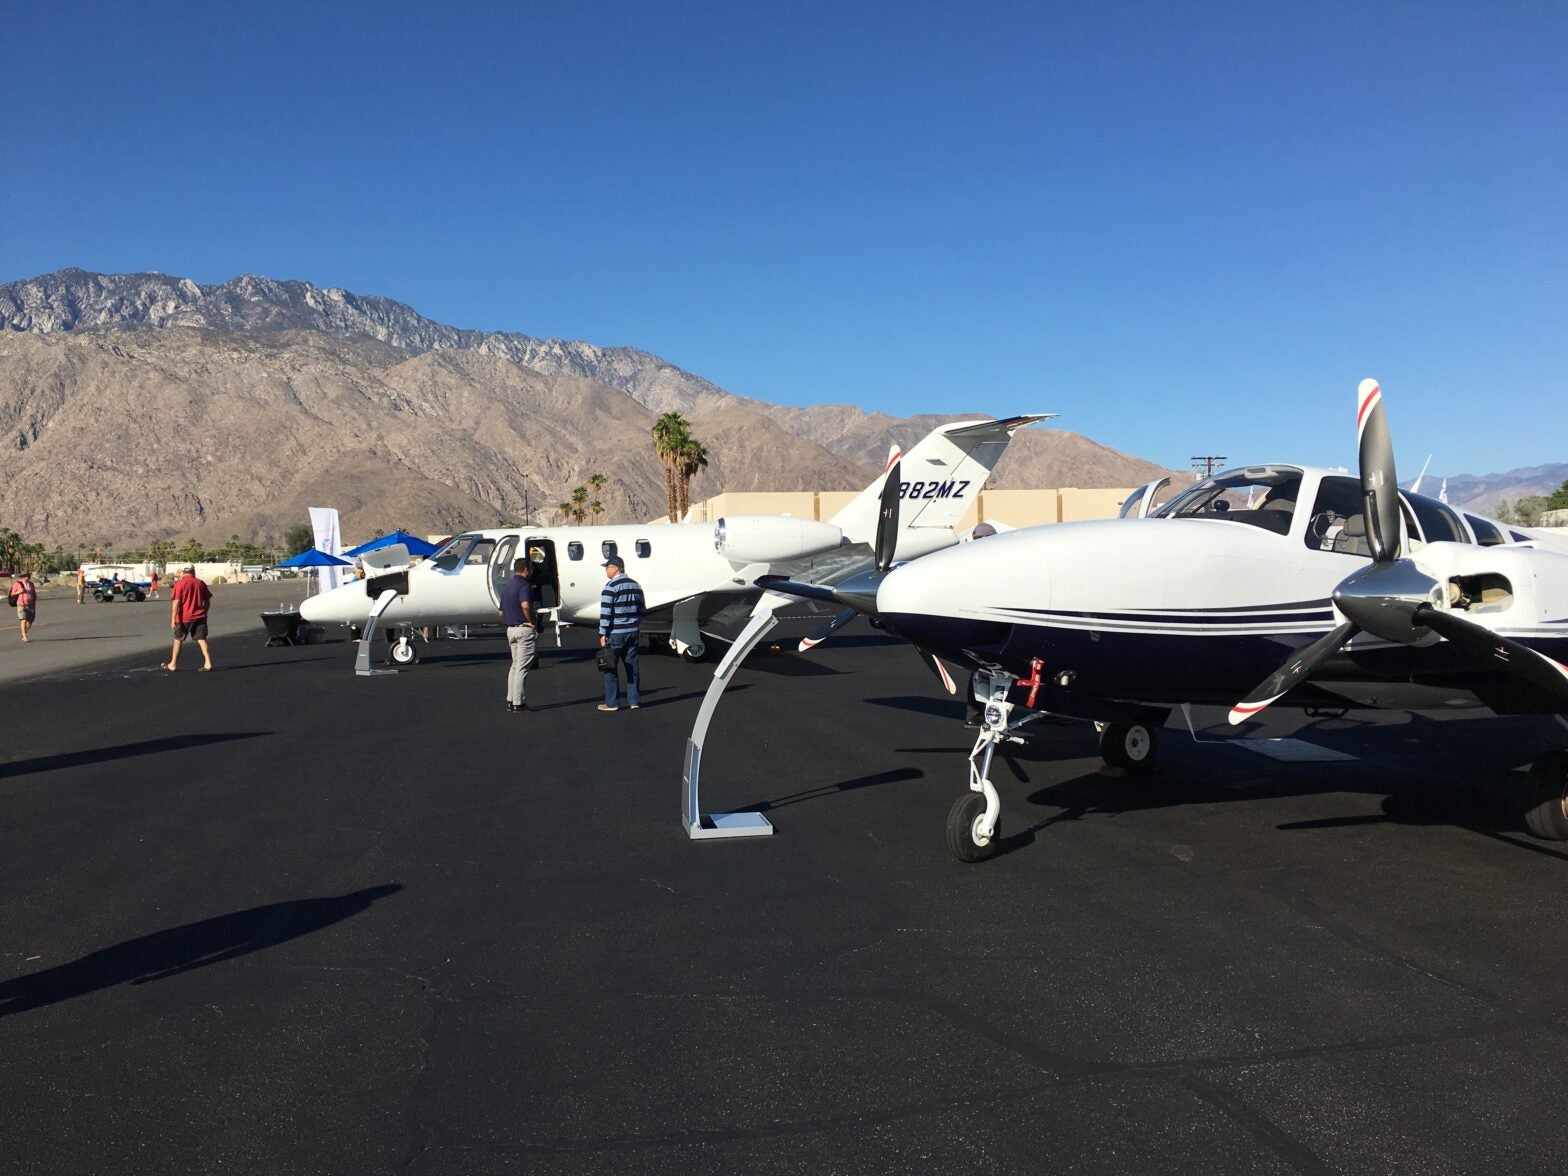 Aviation Expo Swings into Full Gear in Palm Springs